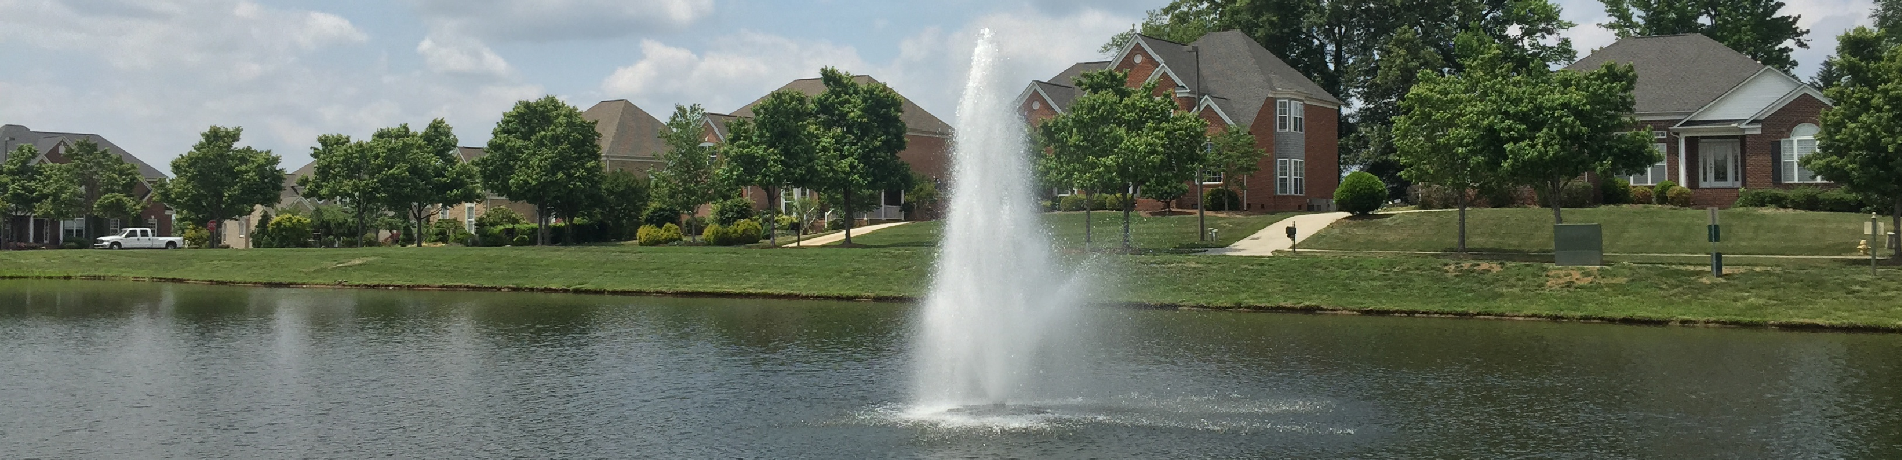 Lake Management Floating Fountains Aeration Irrigation Pump Systems Dallas Fort Worth Texas Par Basic Flow Pattern | AquaMaster Fountains Master Series Dallas Fort Worth | The Lake Doctor